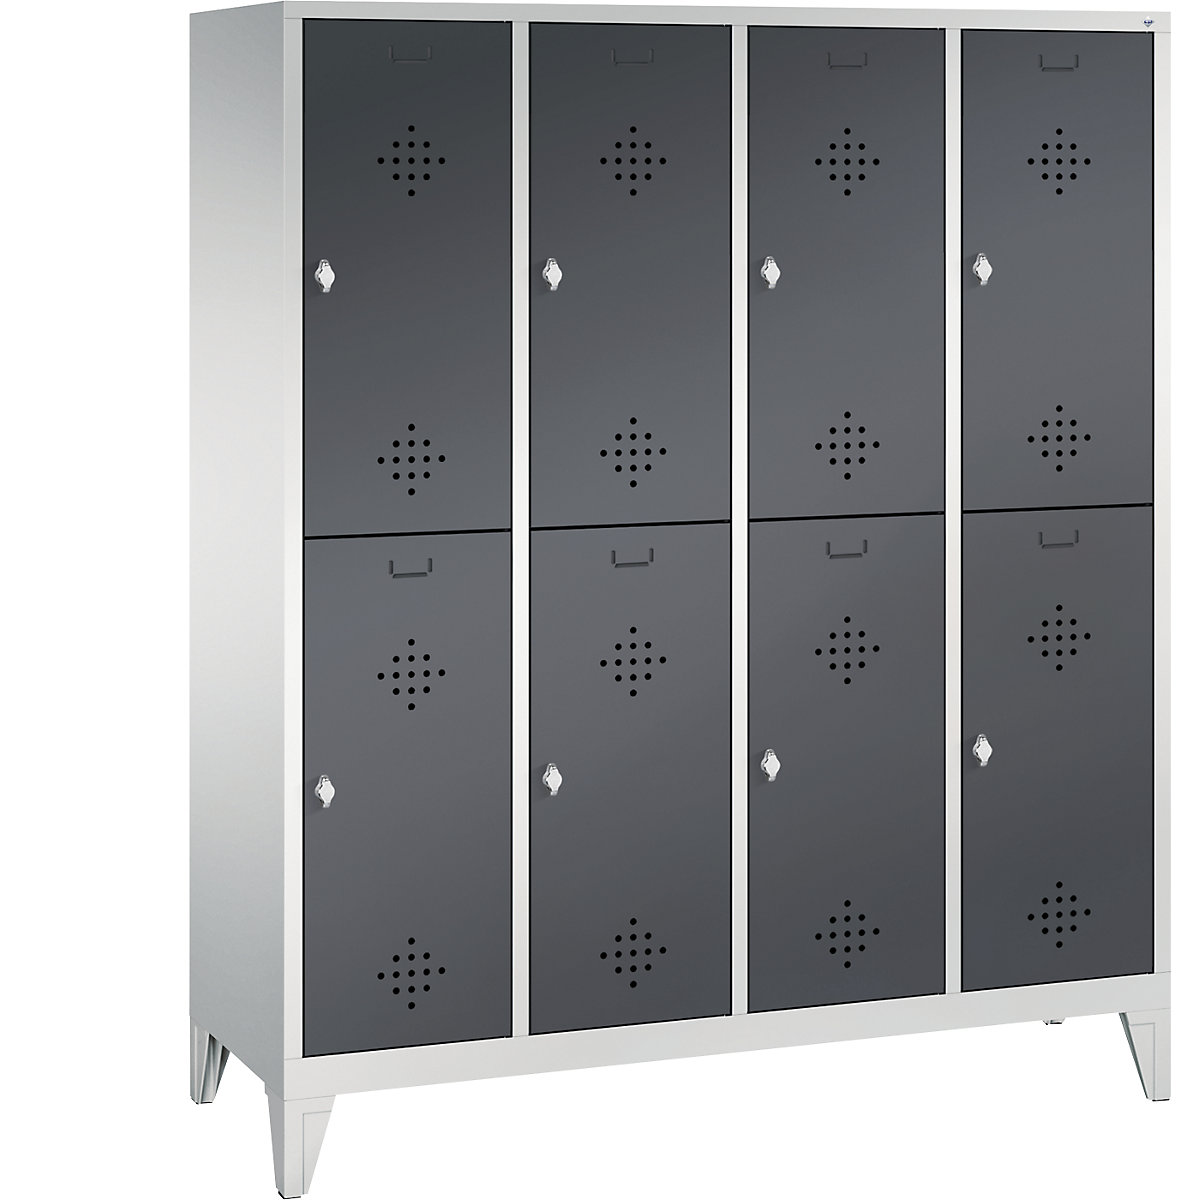 CLASSIC cloakroom locker with feet, double tier – C+P, 4 compartments, 2 shelf compartments each, compartment width 400 mm, light grey / black grey-13